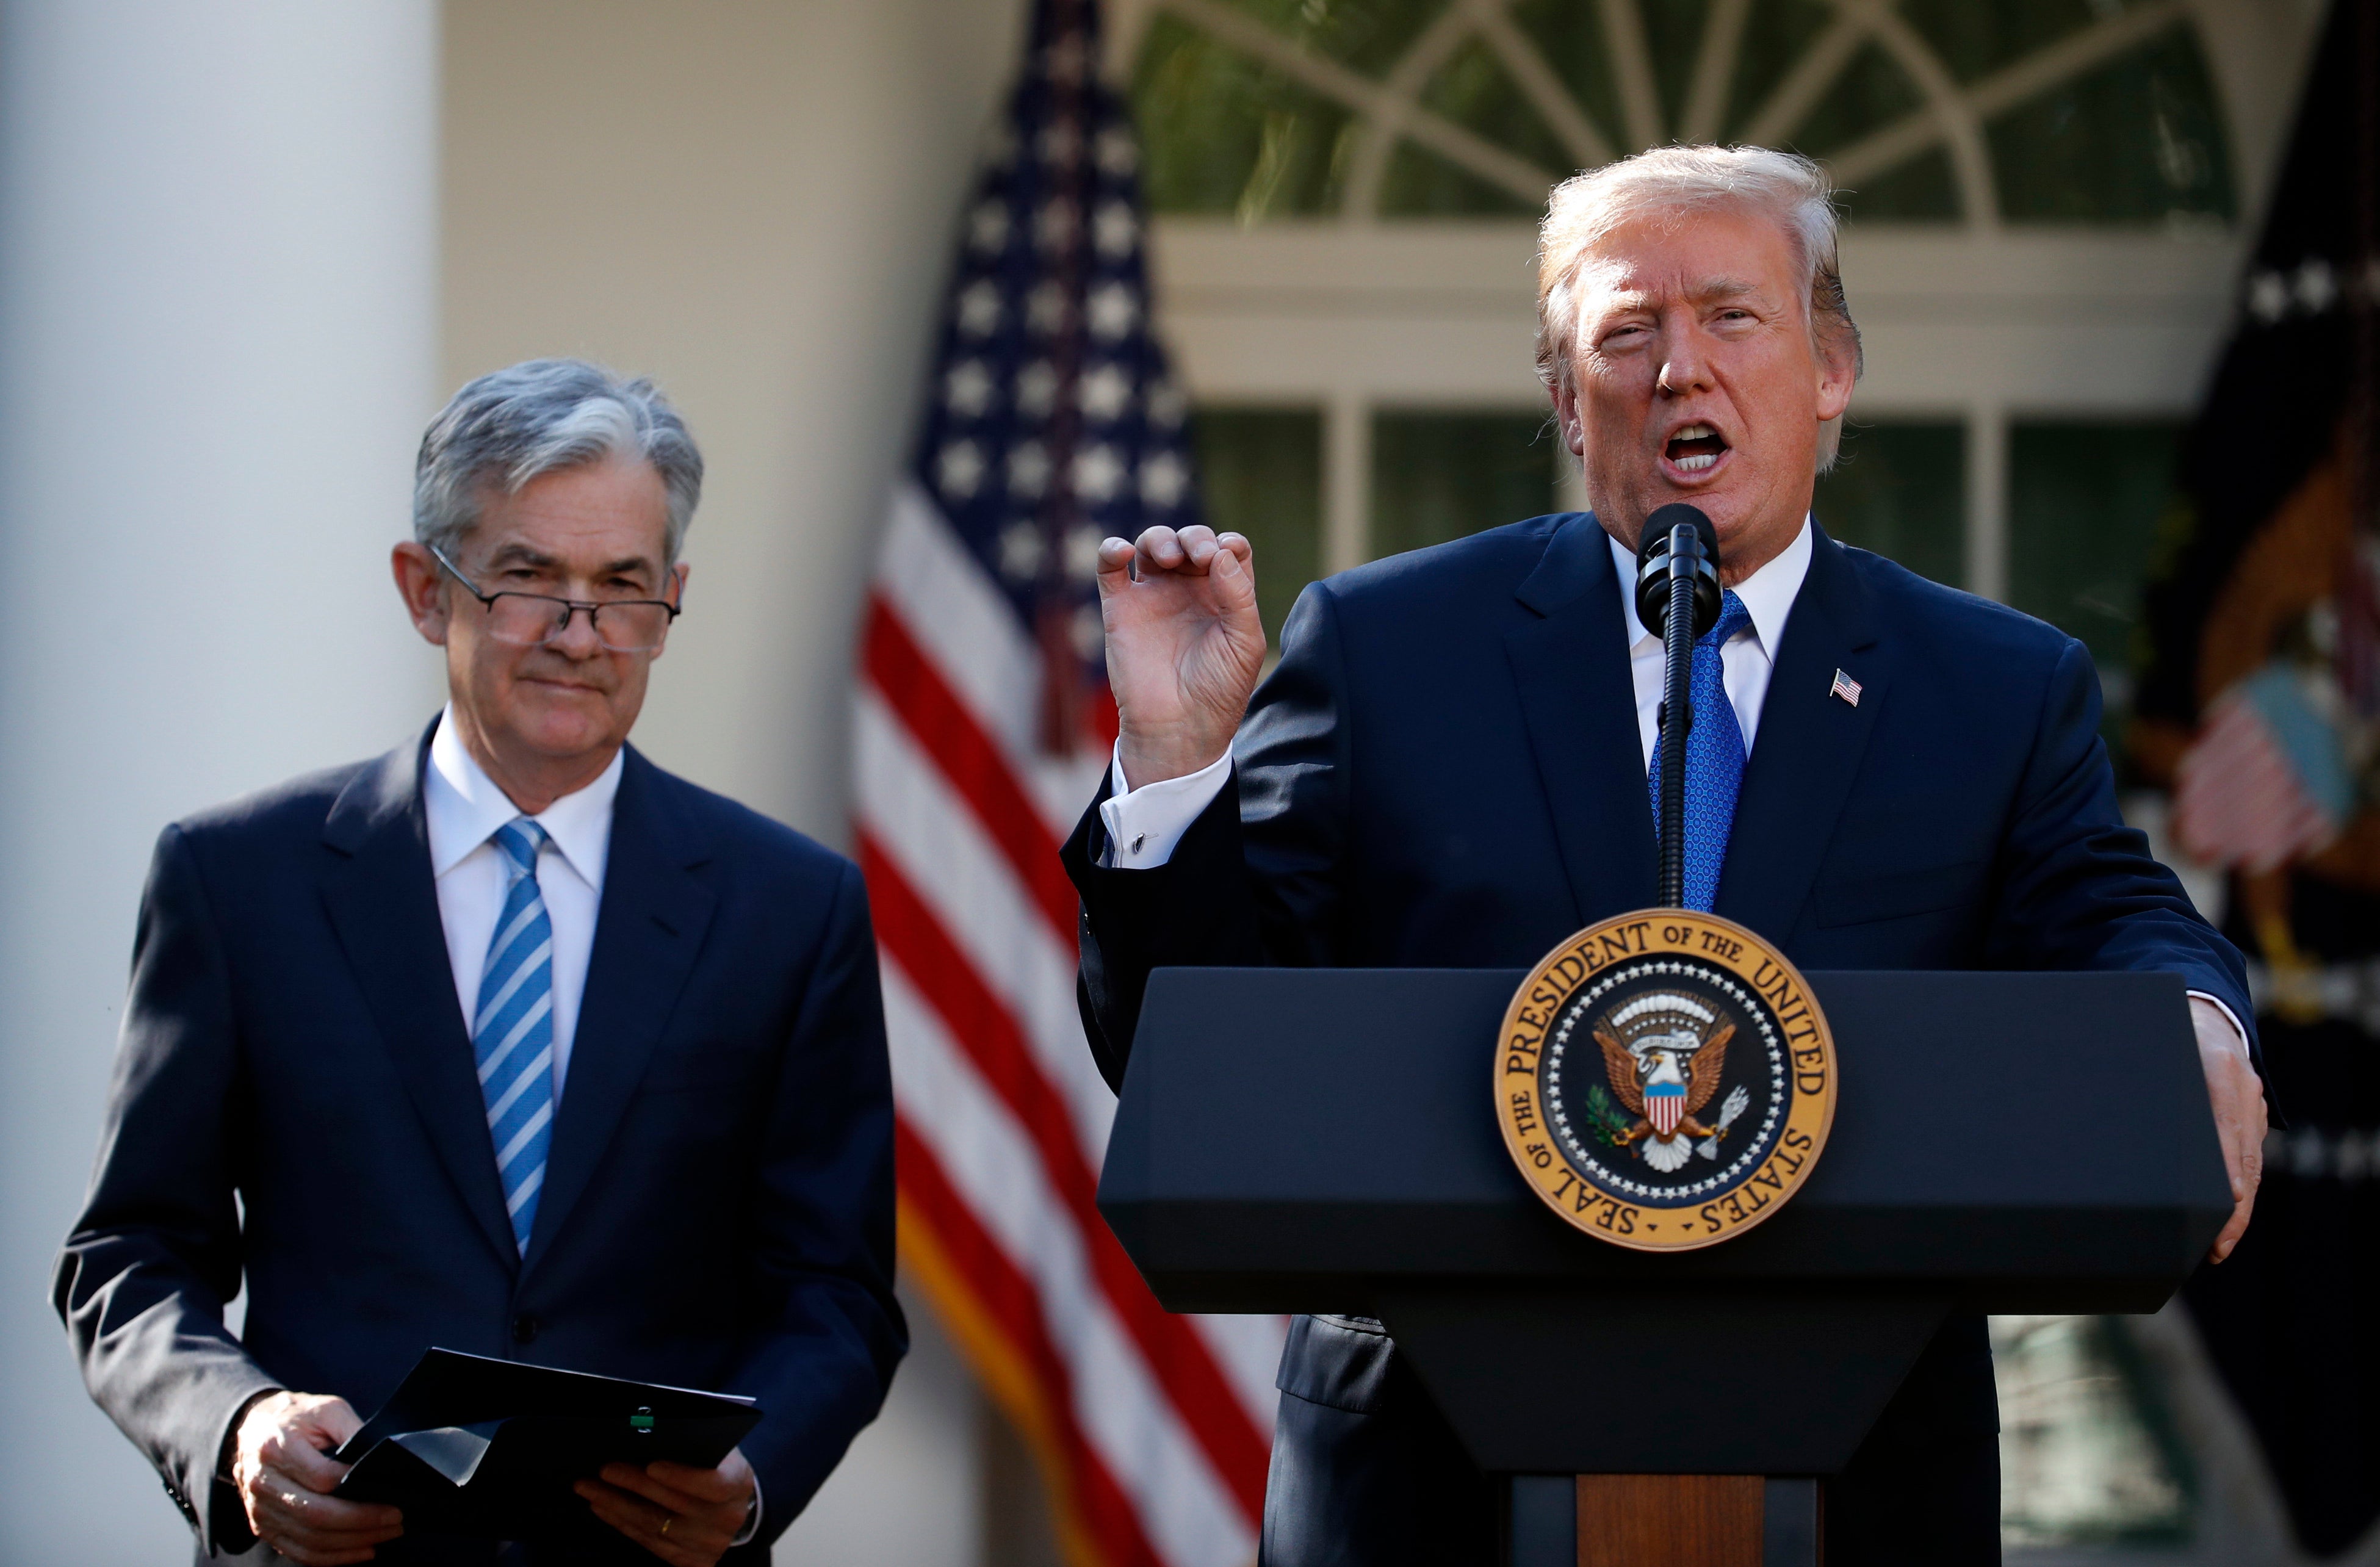 President Trump Nominates Jerome Powell For Next Fed Chair
